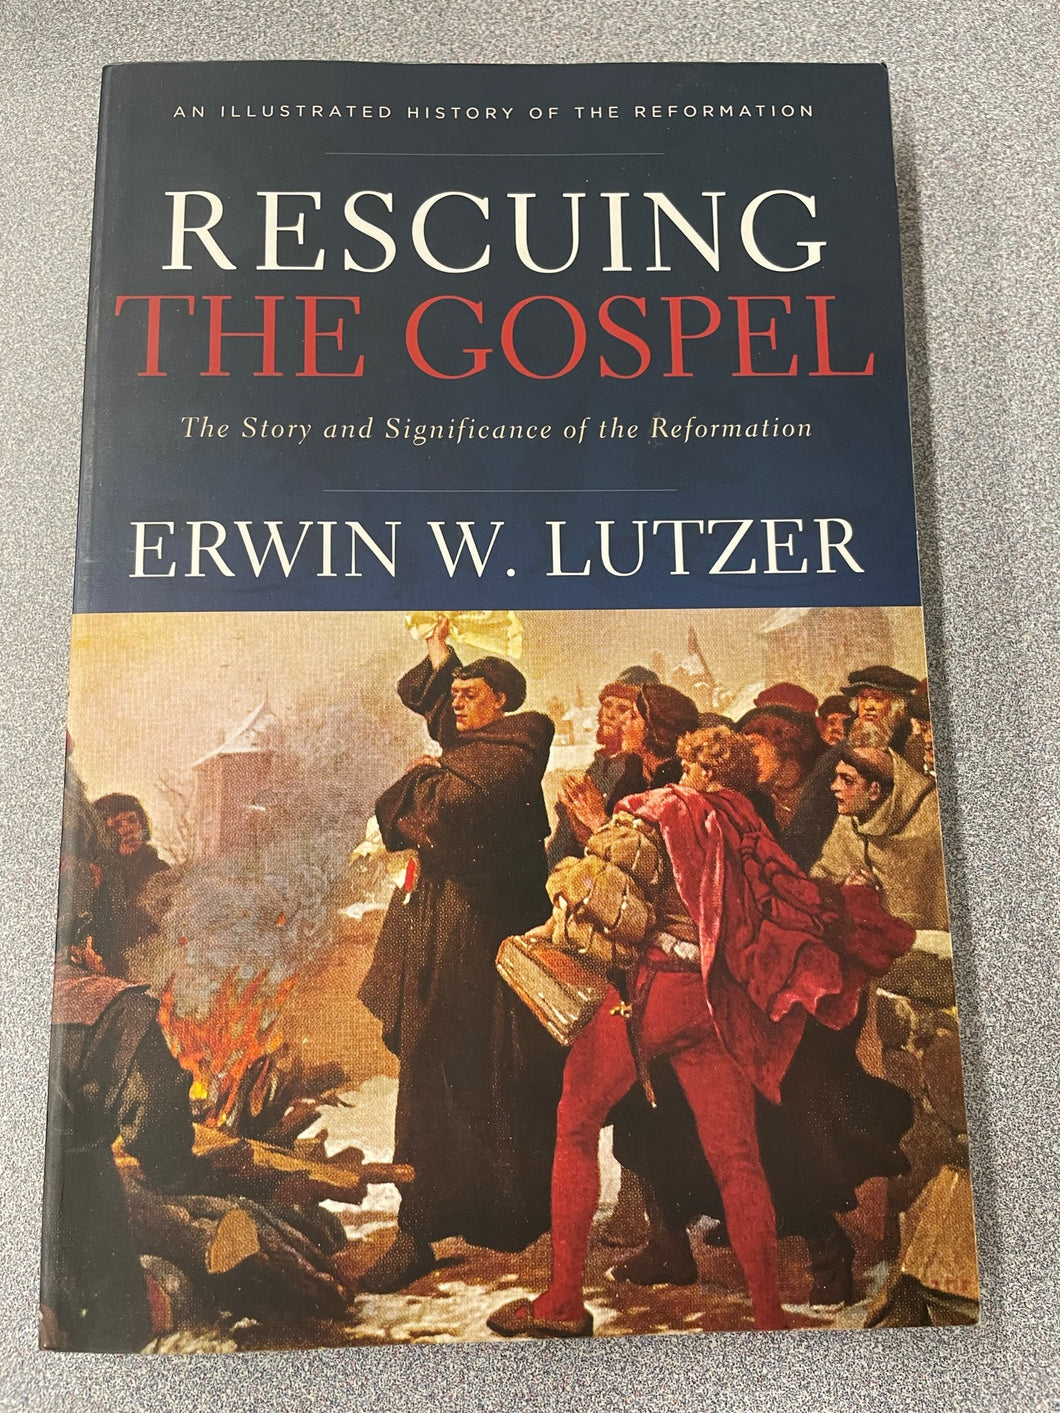 Rescuing The Gospel: The Story and Significance of the Reformation, Lutzer, Erwin W. [2016] RS 6/23